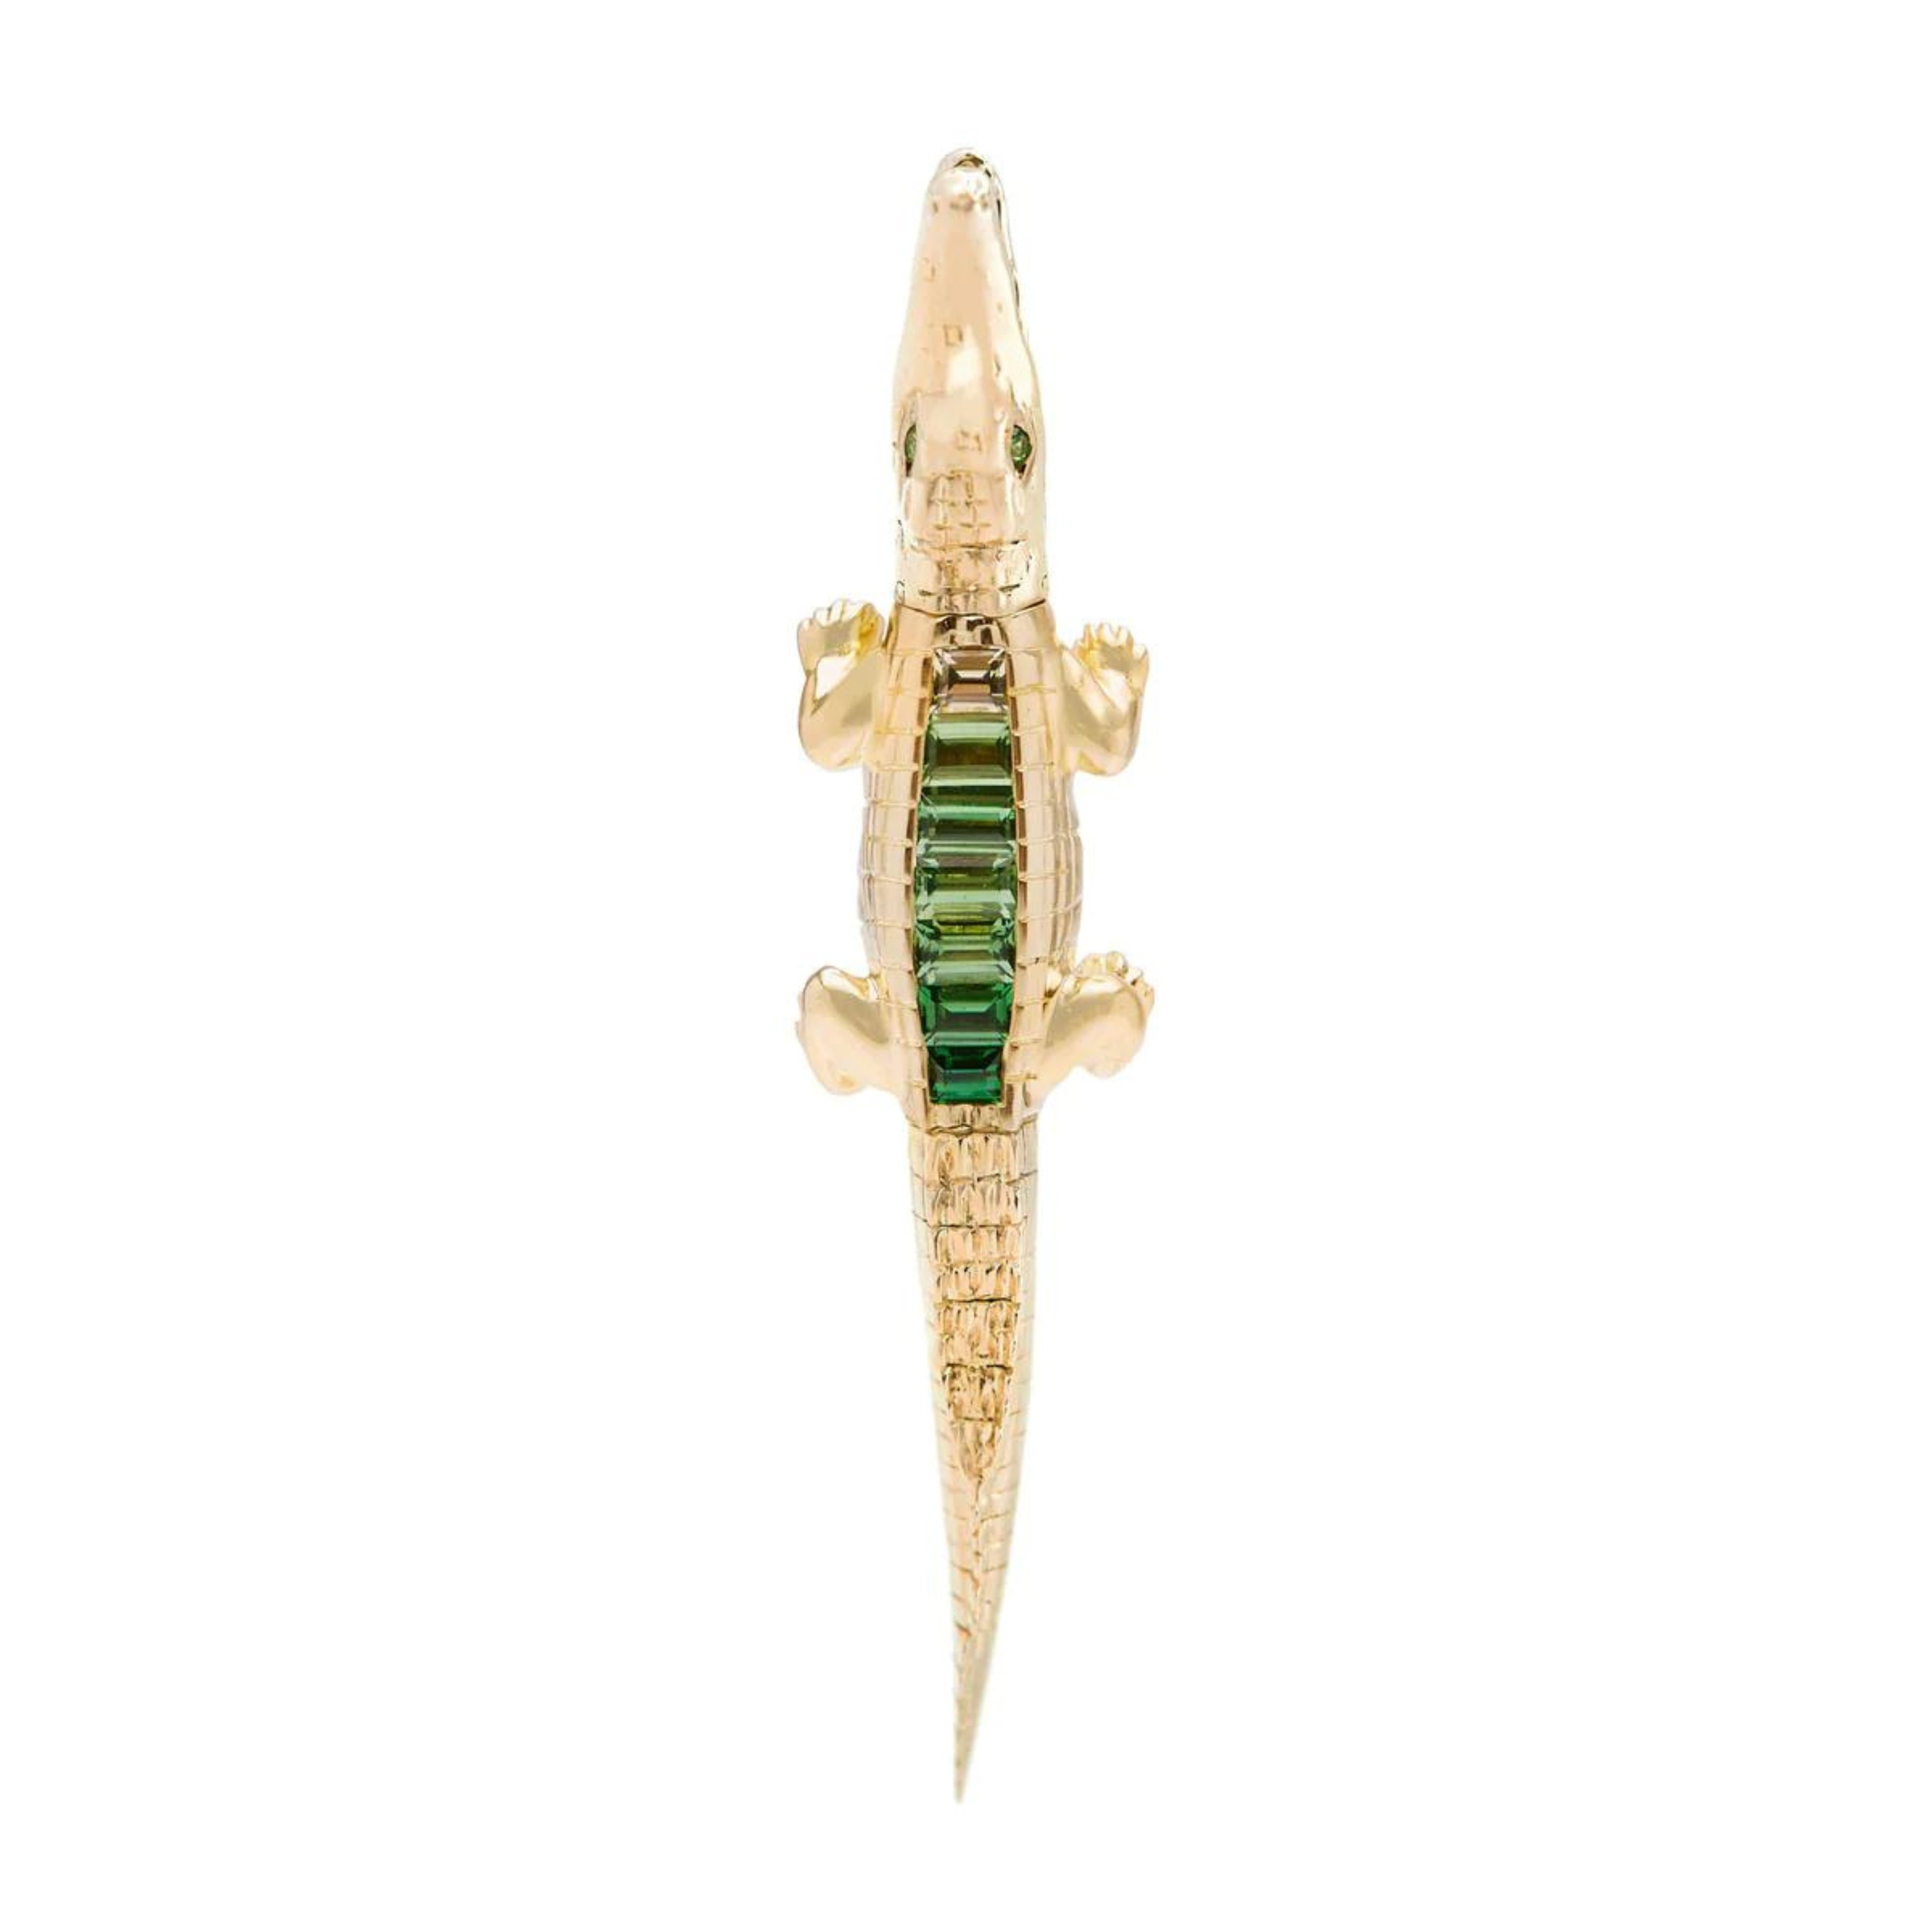 Bibi ven der Velden, Tsavorite Alligator Ear Bite Earring  Crafted in 18K yellow gold and featuring an arrangement of green tsavorites, the intricately carved design replicates an alligator&#39;s body. Shown from above.